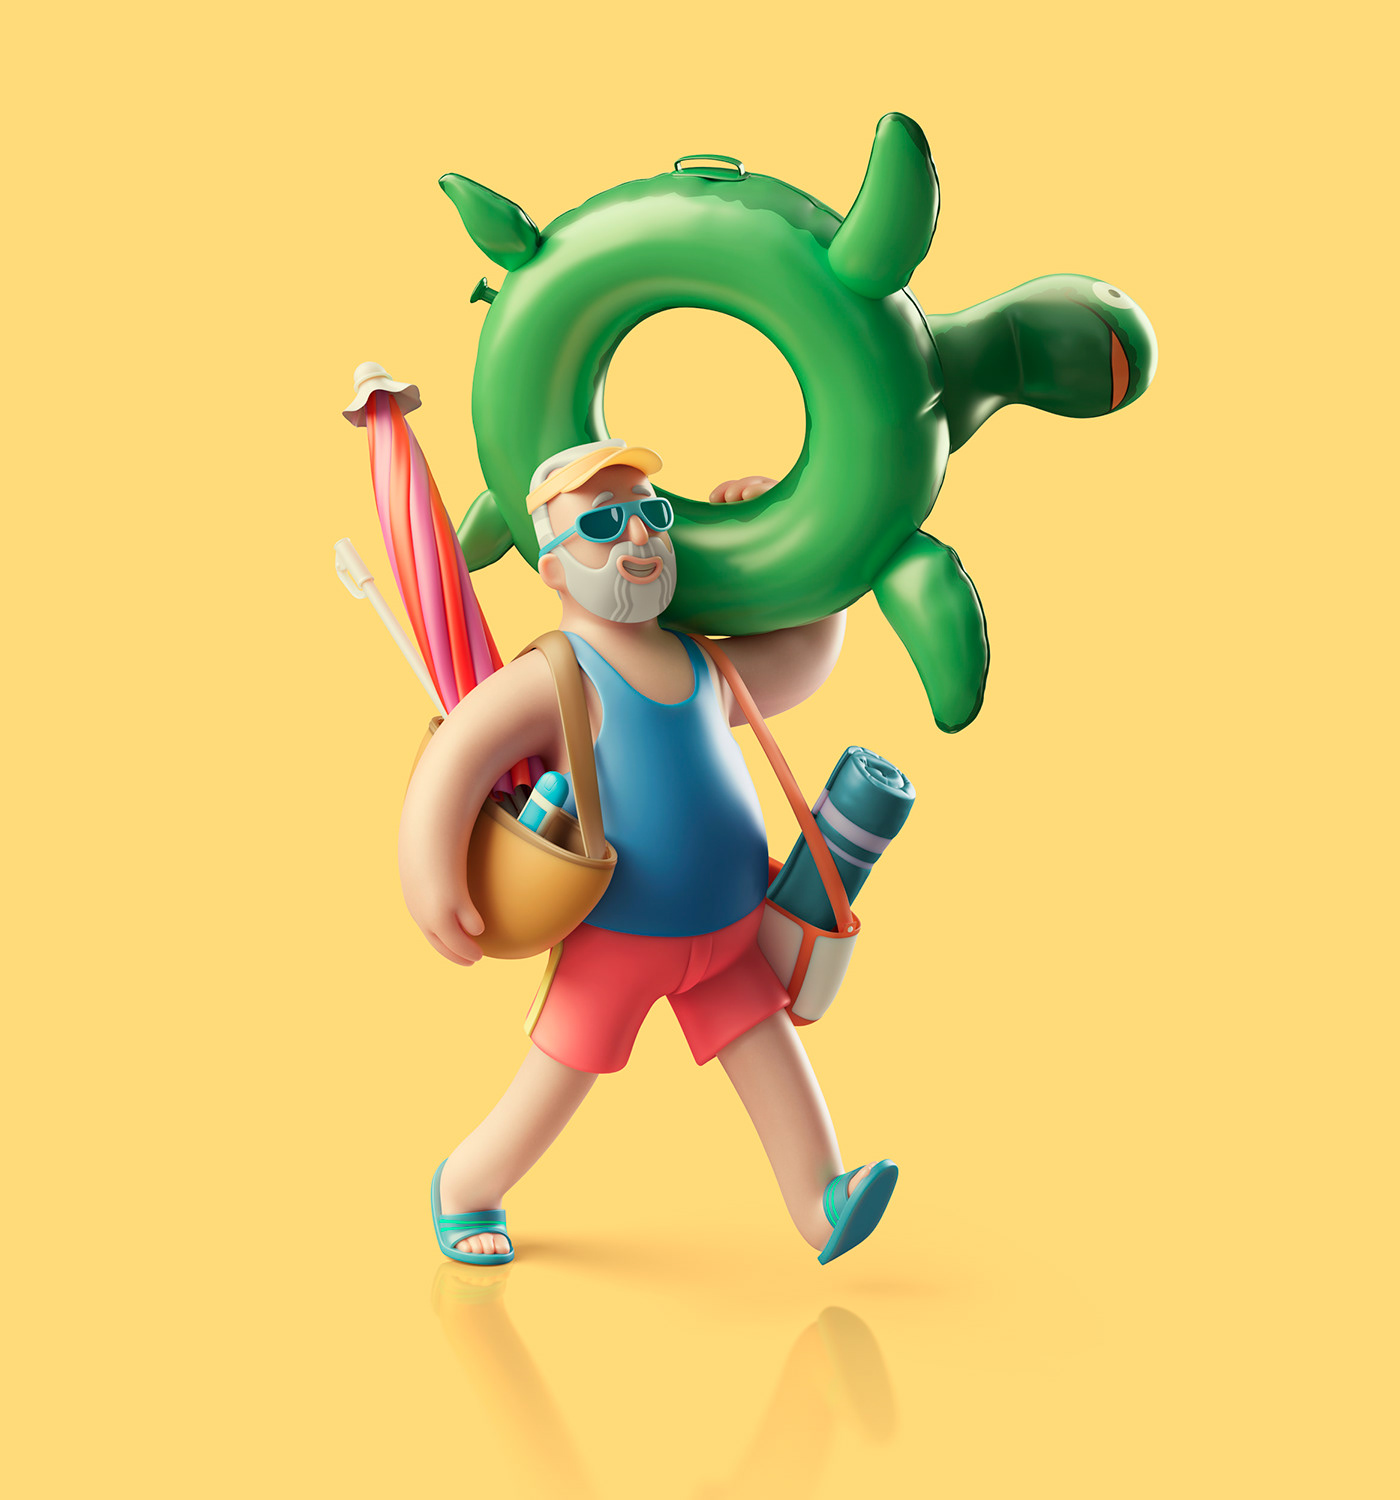 2D 3D 3D MOVIE Advertising  animation  Character design  concept images estudioicone icone Still